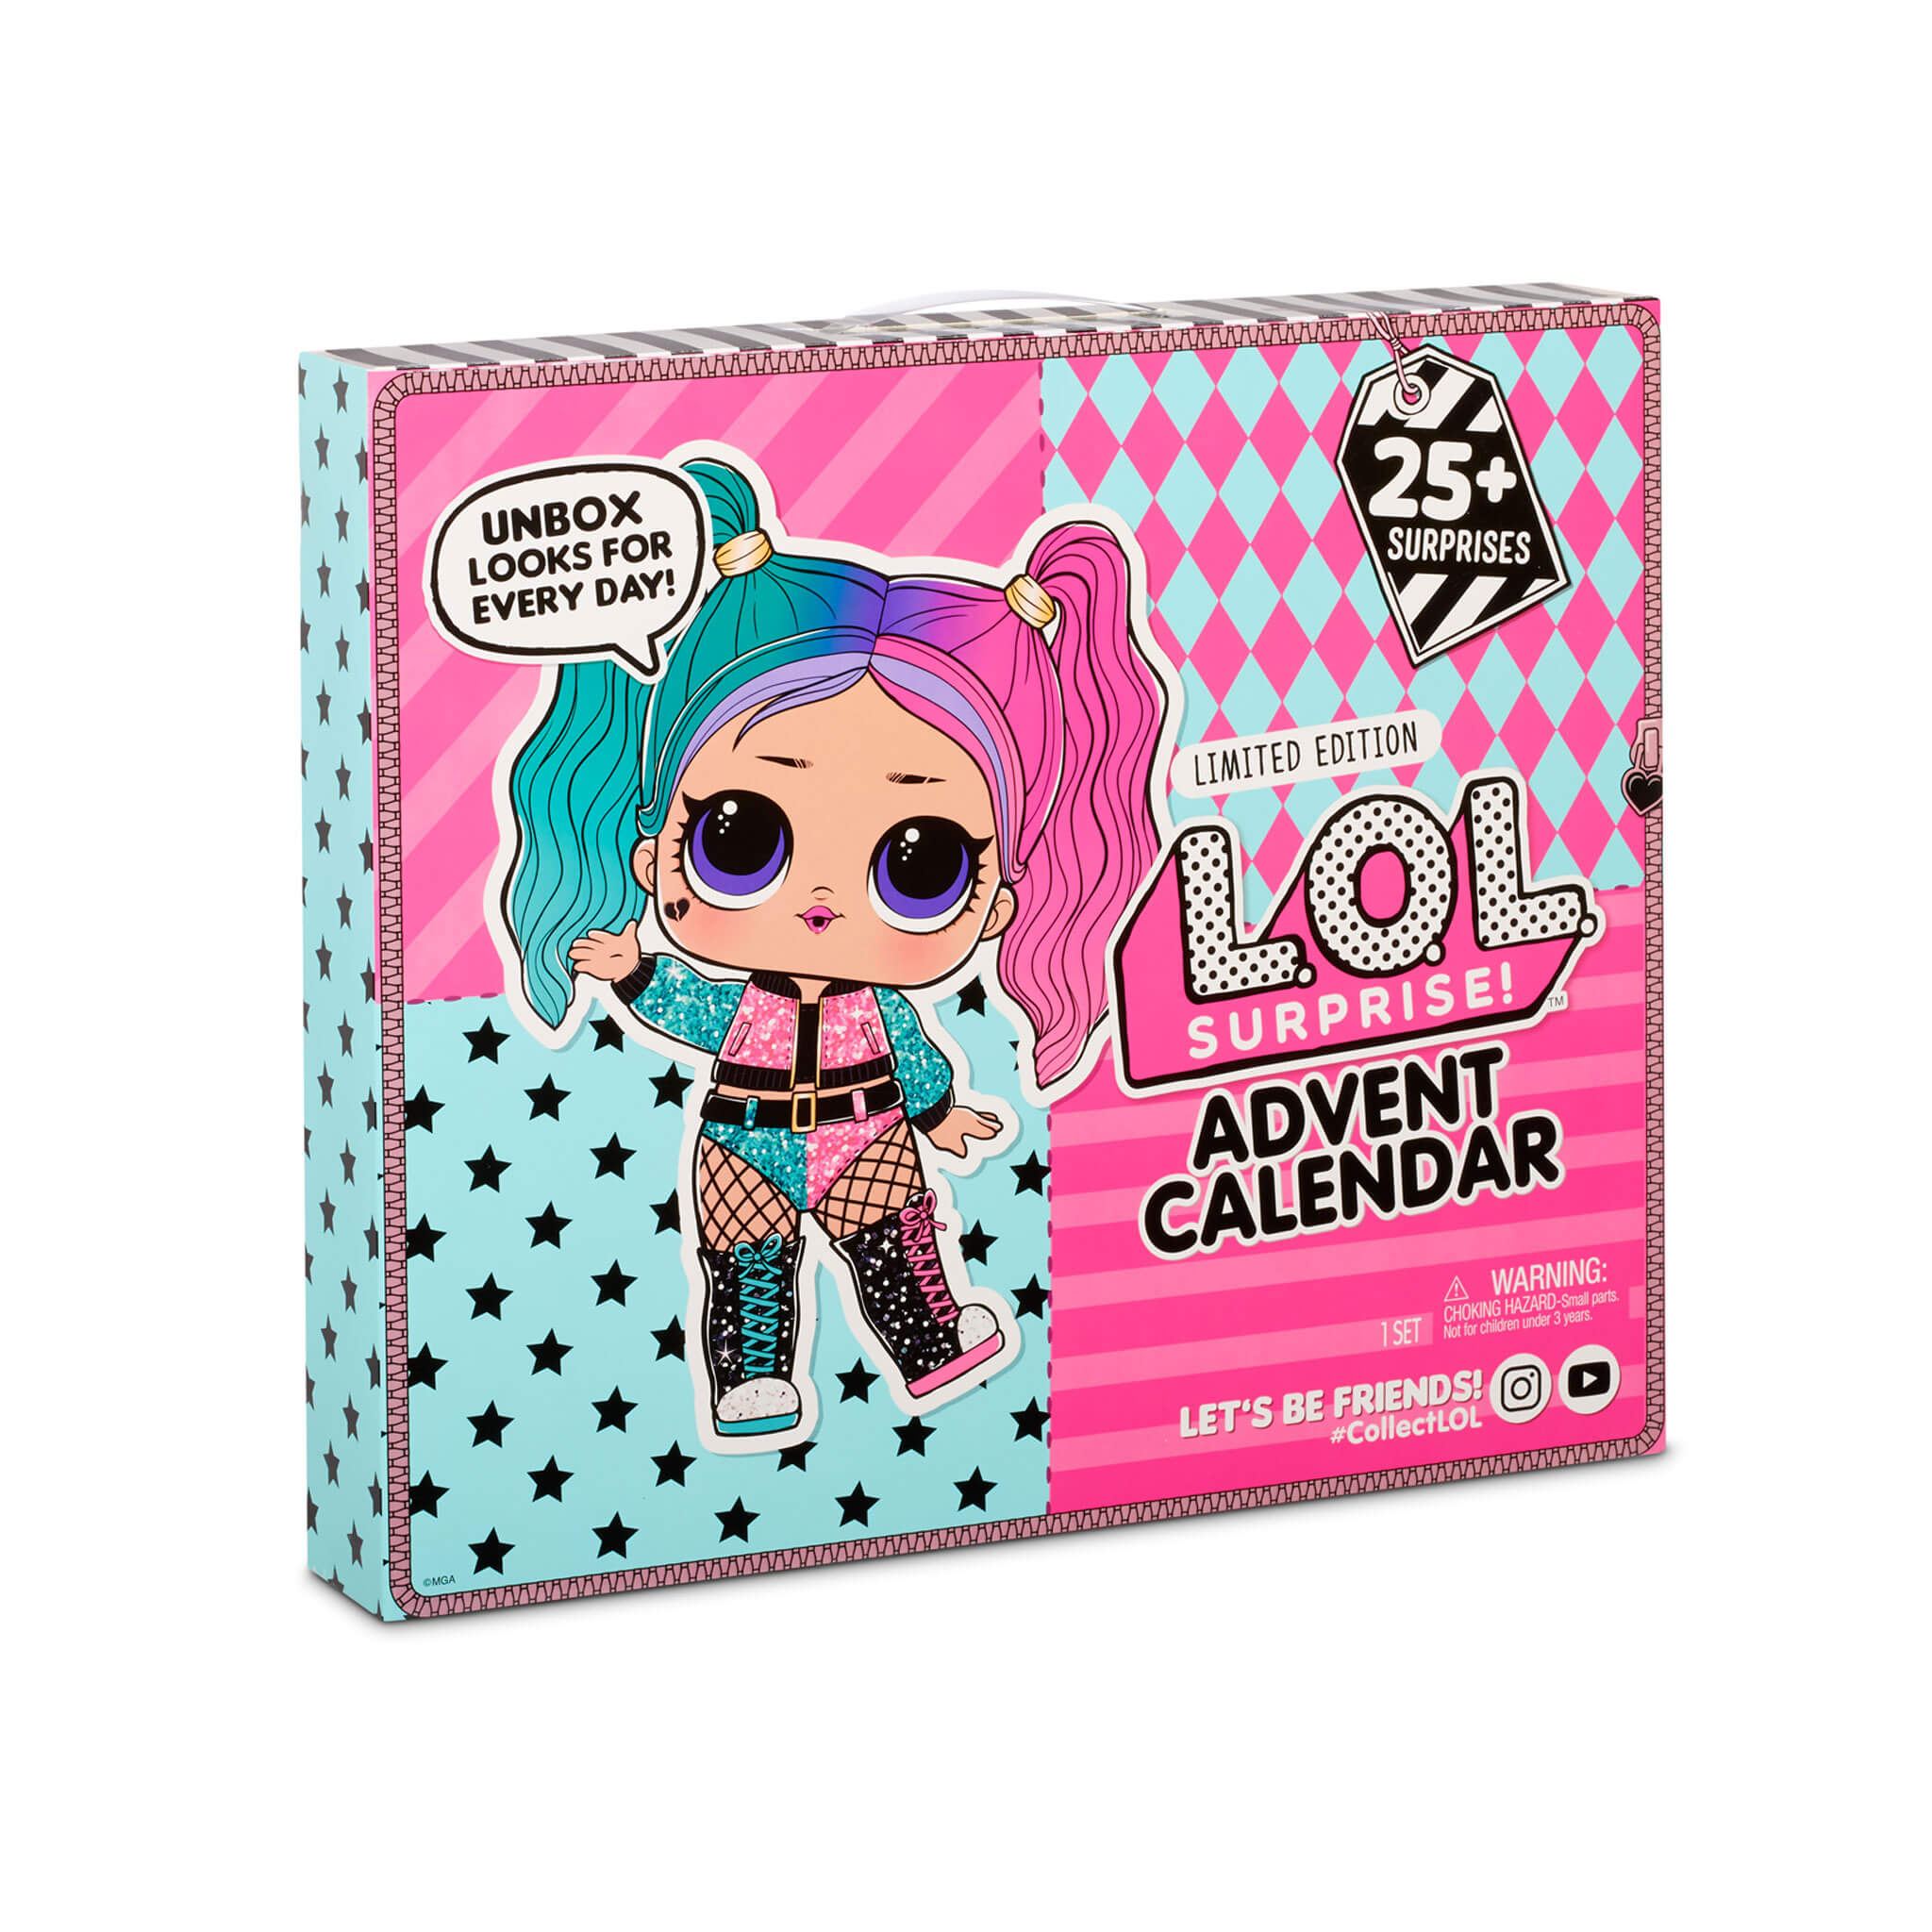 LOL Surprise Advent Calendar with Limited Edition Doll and 25+ Surprises